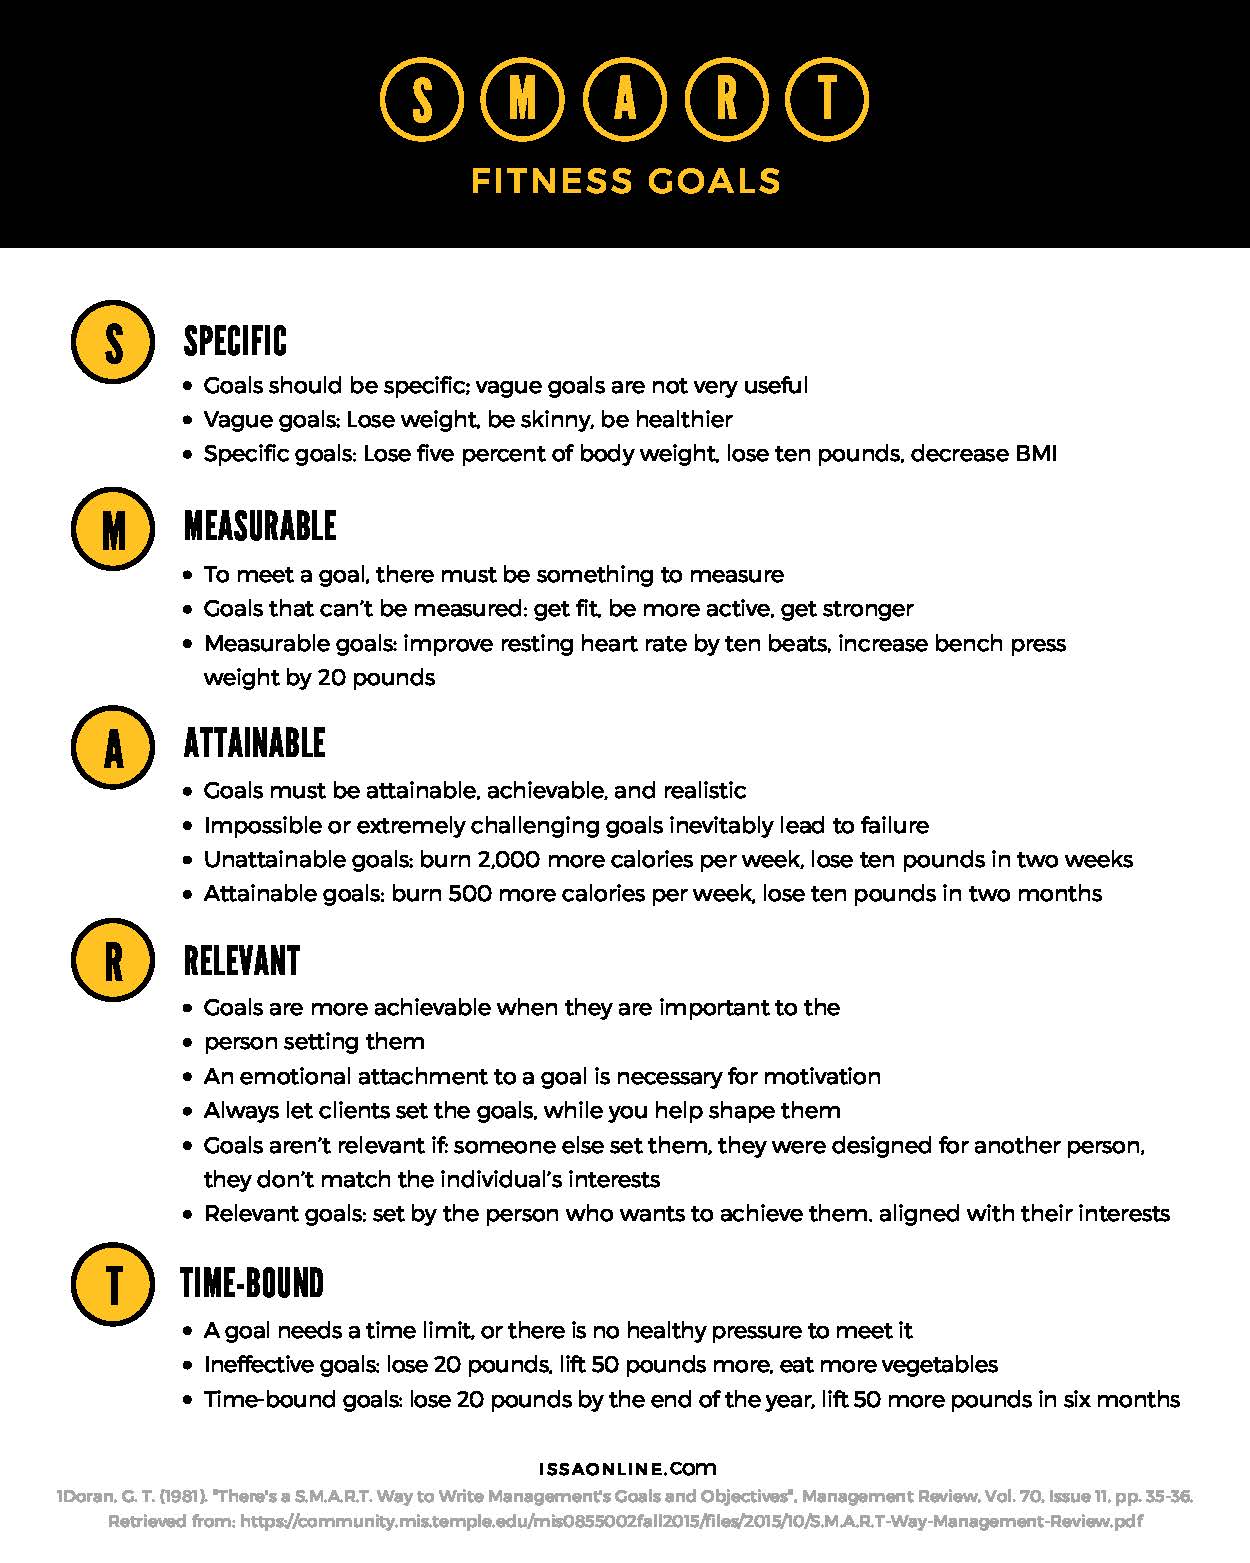 Setting Fitness Goals is Essential to Long-Term Success